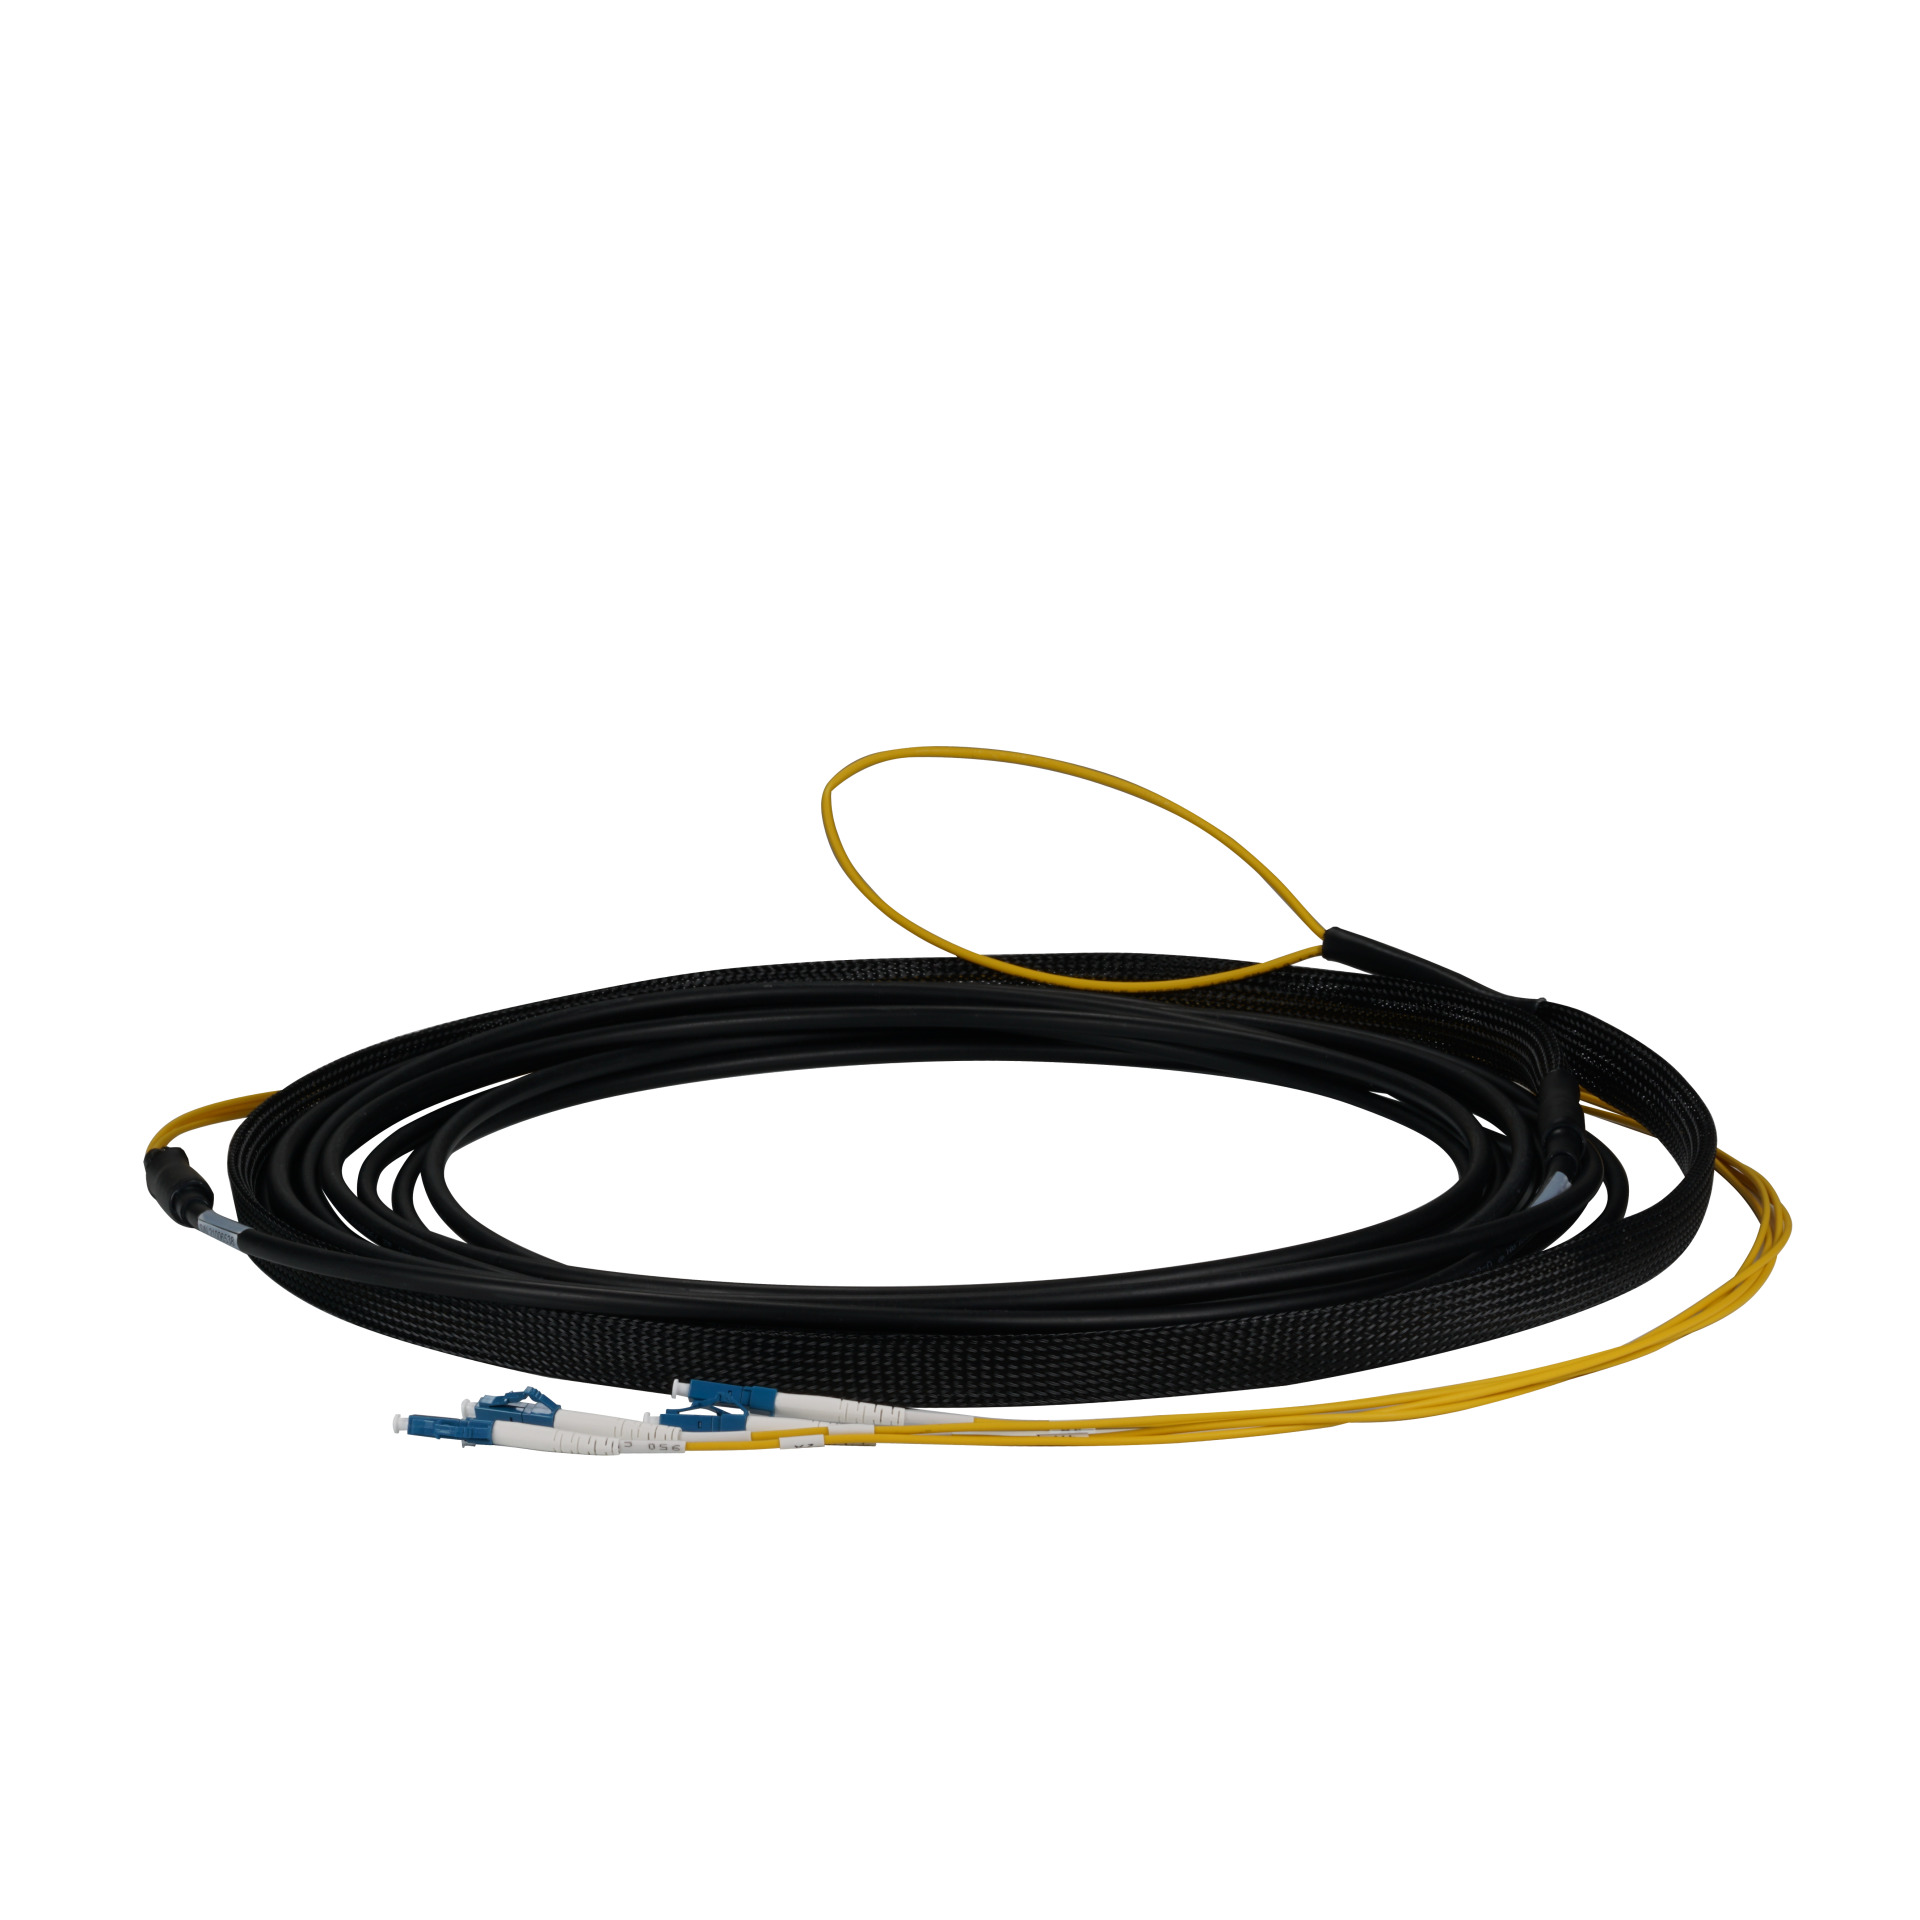 Trunk cable U-DQ(ZN)BH 12E 9/125, LC/LC OS2 170m